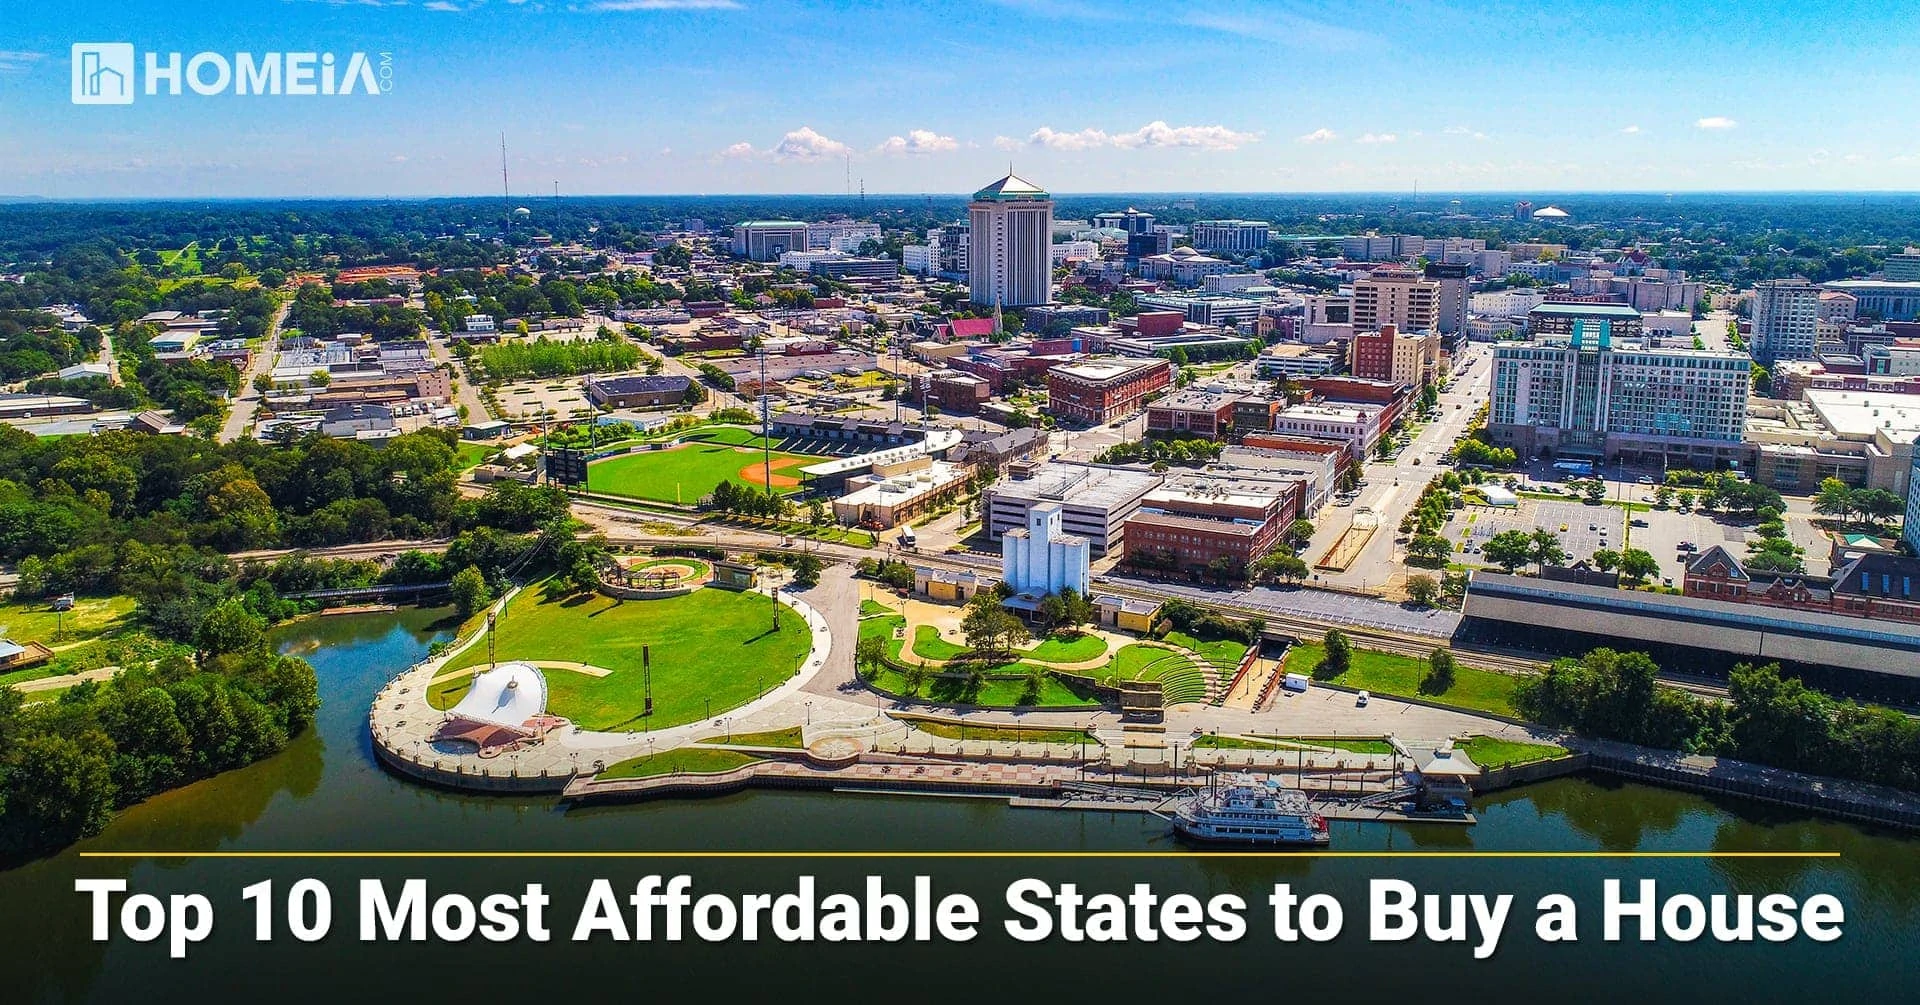 Top 10 Most Affordable States to Buy a House